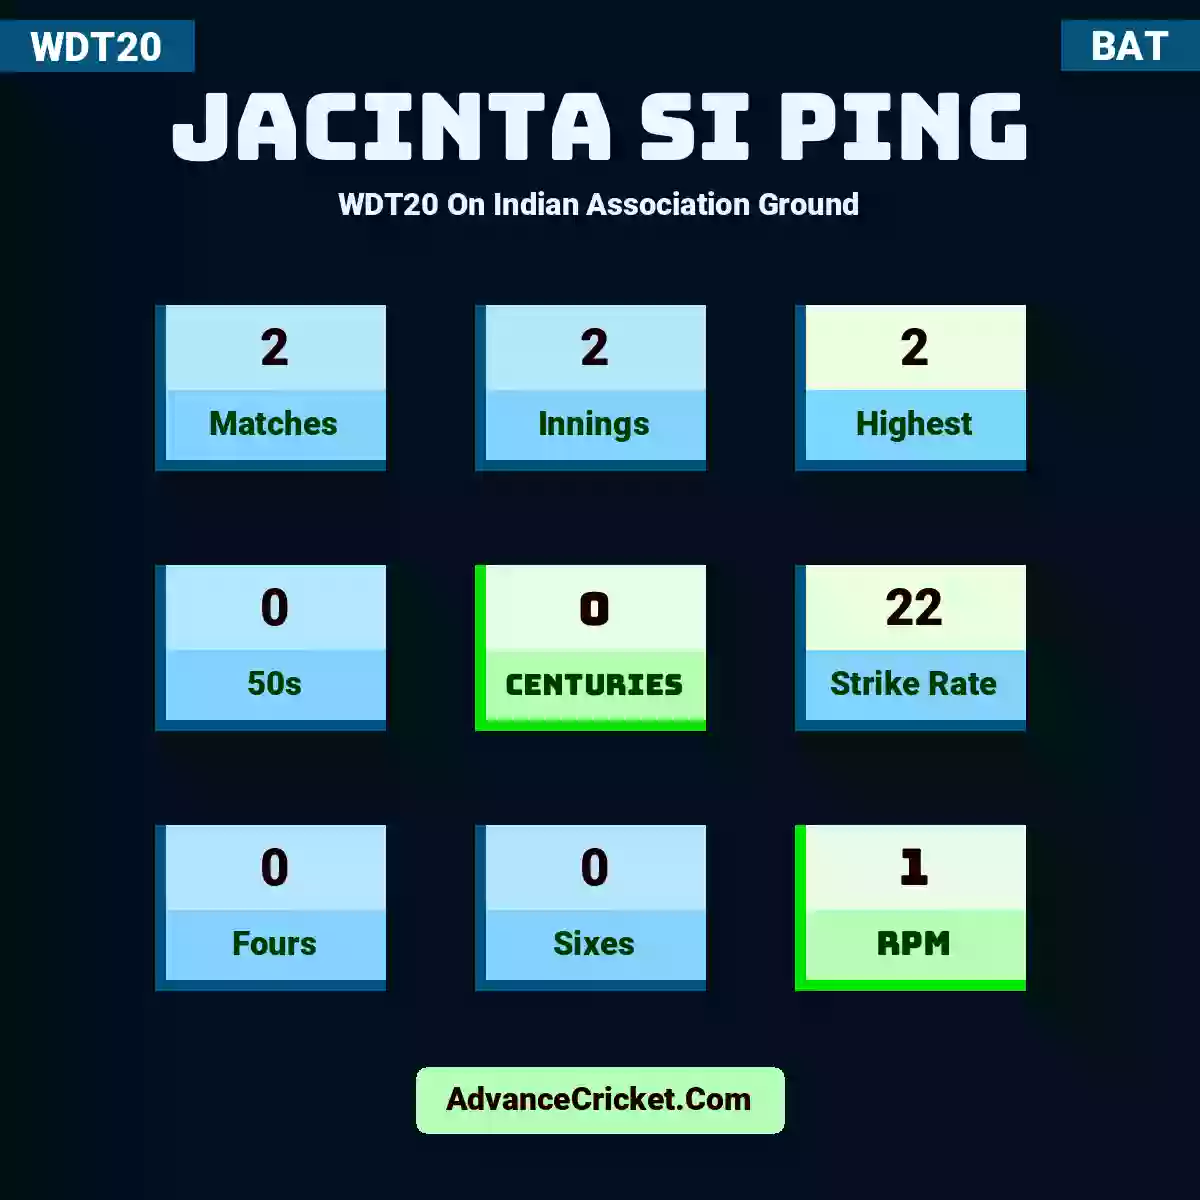 Jacinta Si Ping WDT20  On Indian Association Ground, Jacinta Si Ping played 2 matches, scored 2 runs as highest, 0 half-centuries, and 0 centuries, with a strike rate of 22. J.Ping hit 0 fours and 0 sixes, with an RPM of 1.